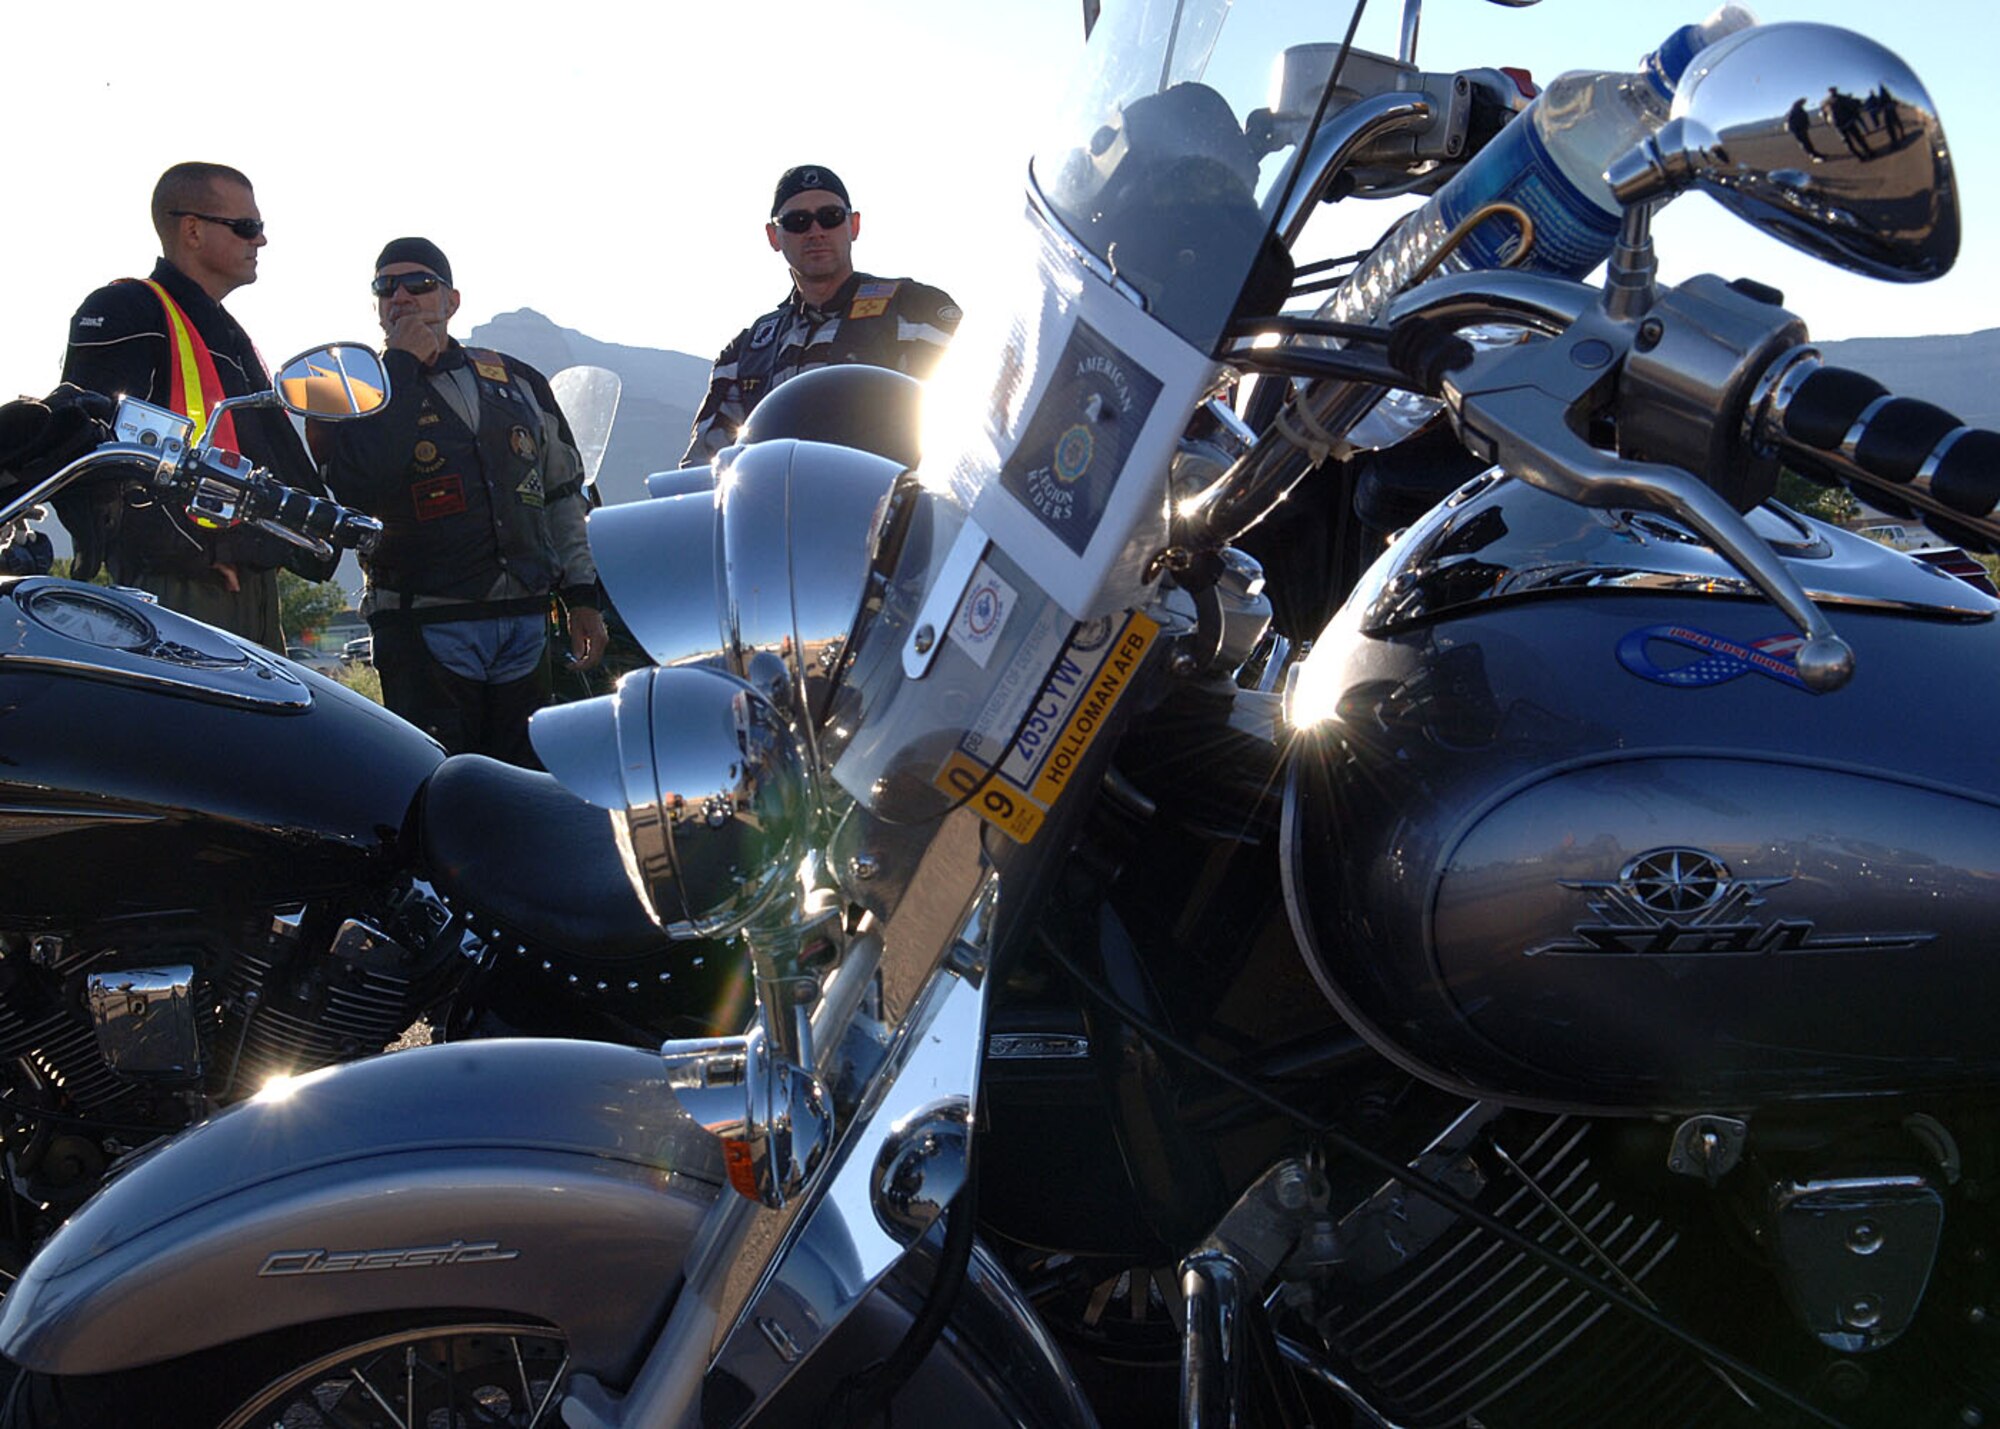 Col. Michael McGee, 49th Fighter Wing vice commander and Mr. Ed Summerall , American Legion Riders Chapter 8 Post 108 president, converse while 1st Lt. Brent Smith, 49th Force Support Squadron, looks on at the motorcycles, October 7, in Alamogordo, N.M.  Lieutenant Smith is a member of the American Legion Riders Chapter 8 Post 108.  (U.S. Air Force photo by Airman 1st Class John D. Strong II)